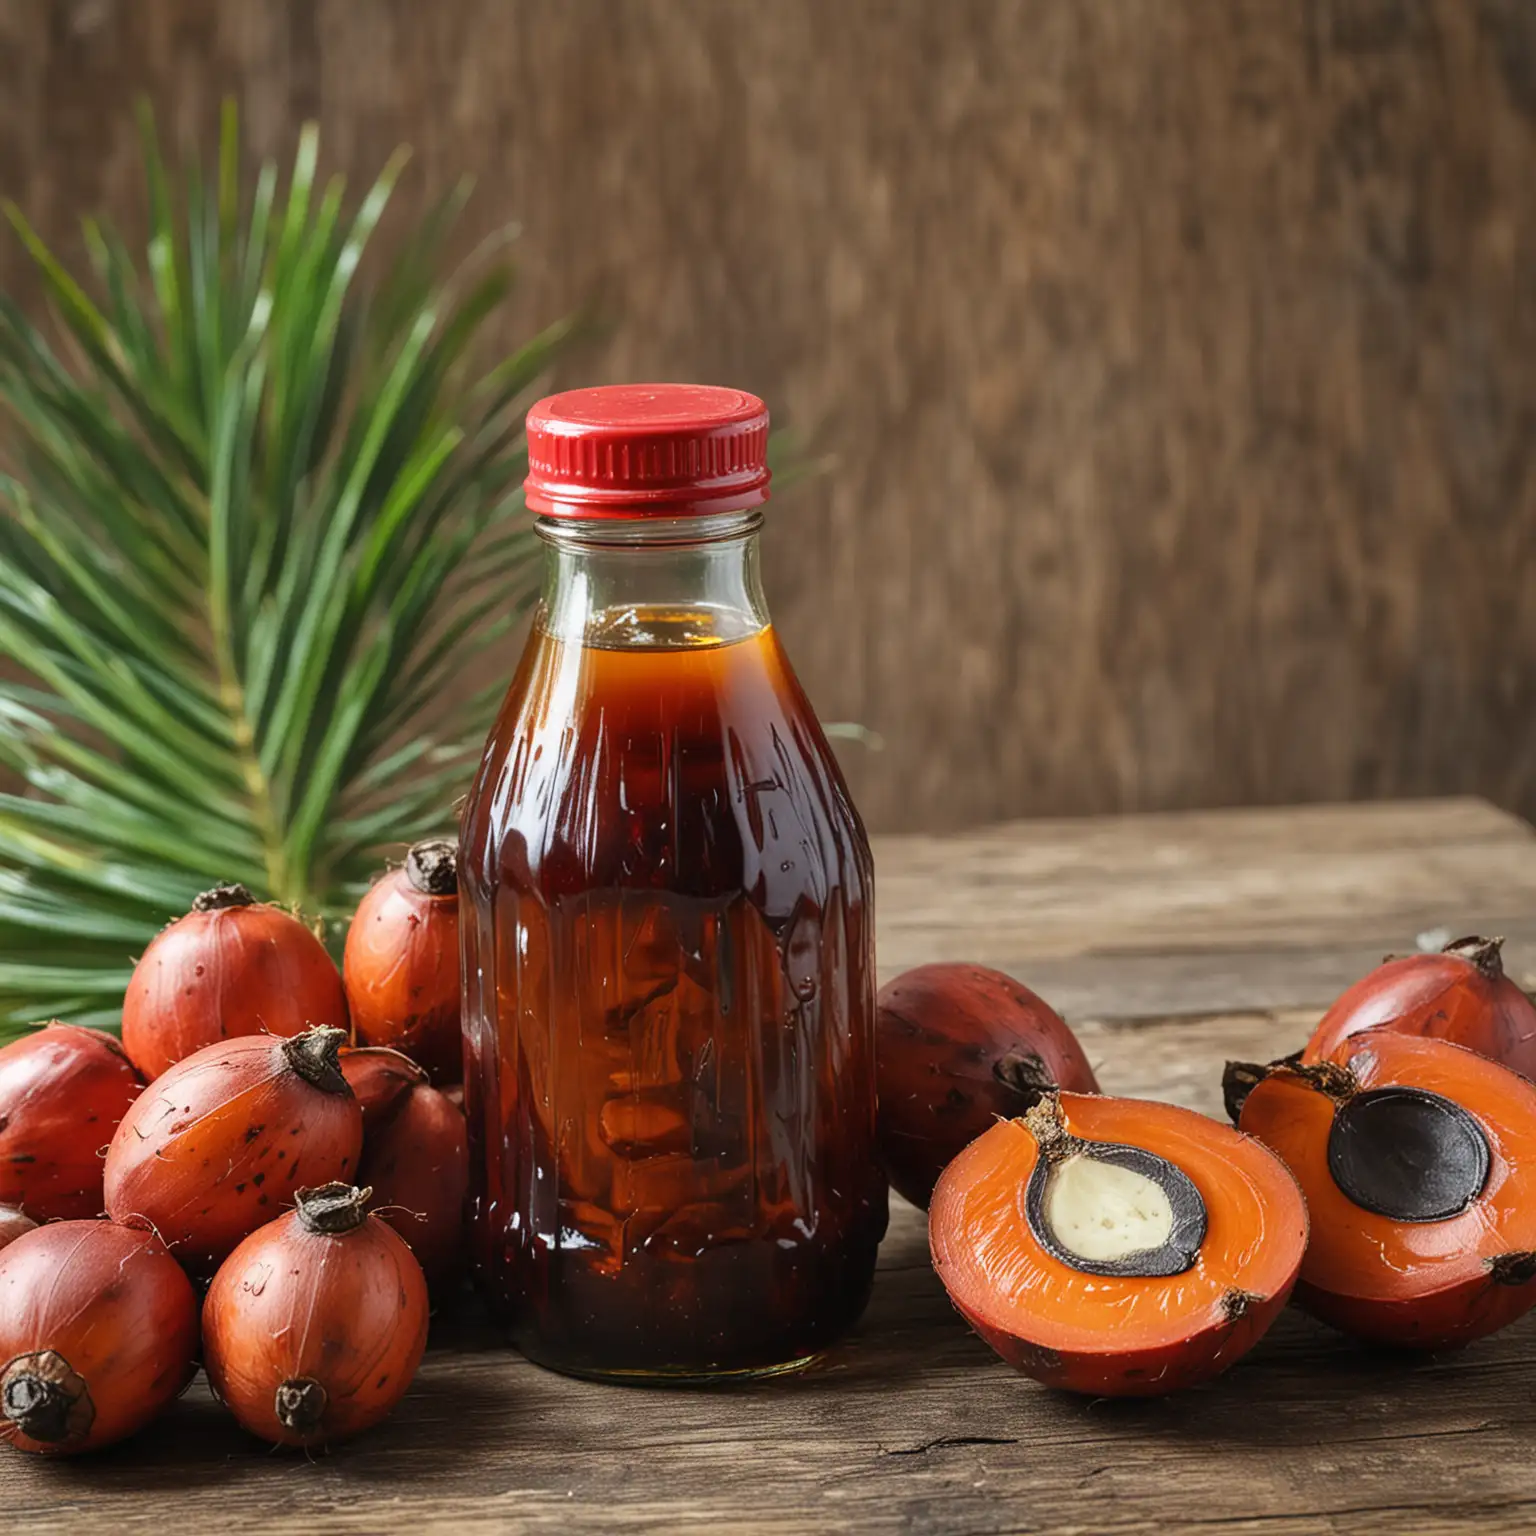 Fresh Palm Fruit and Bottled Palm Oil on Table